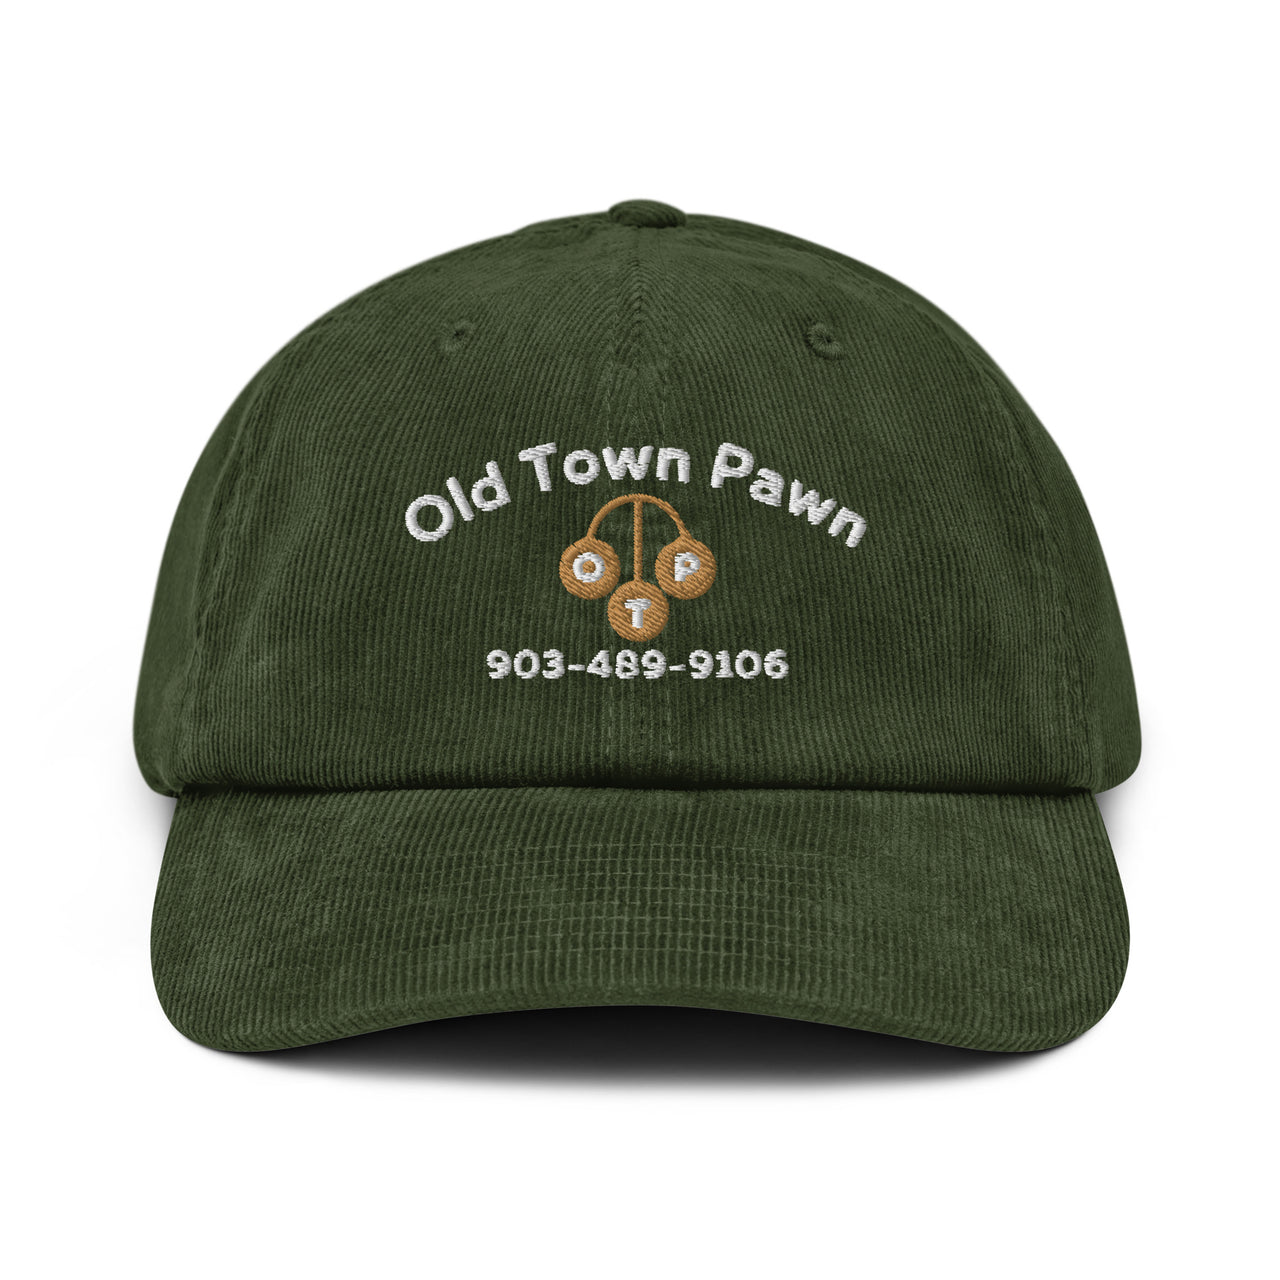 Old Town Pawn Corduroy Hat